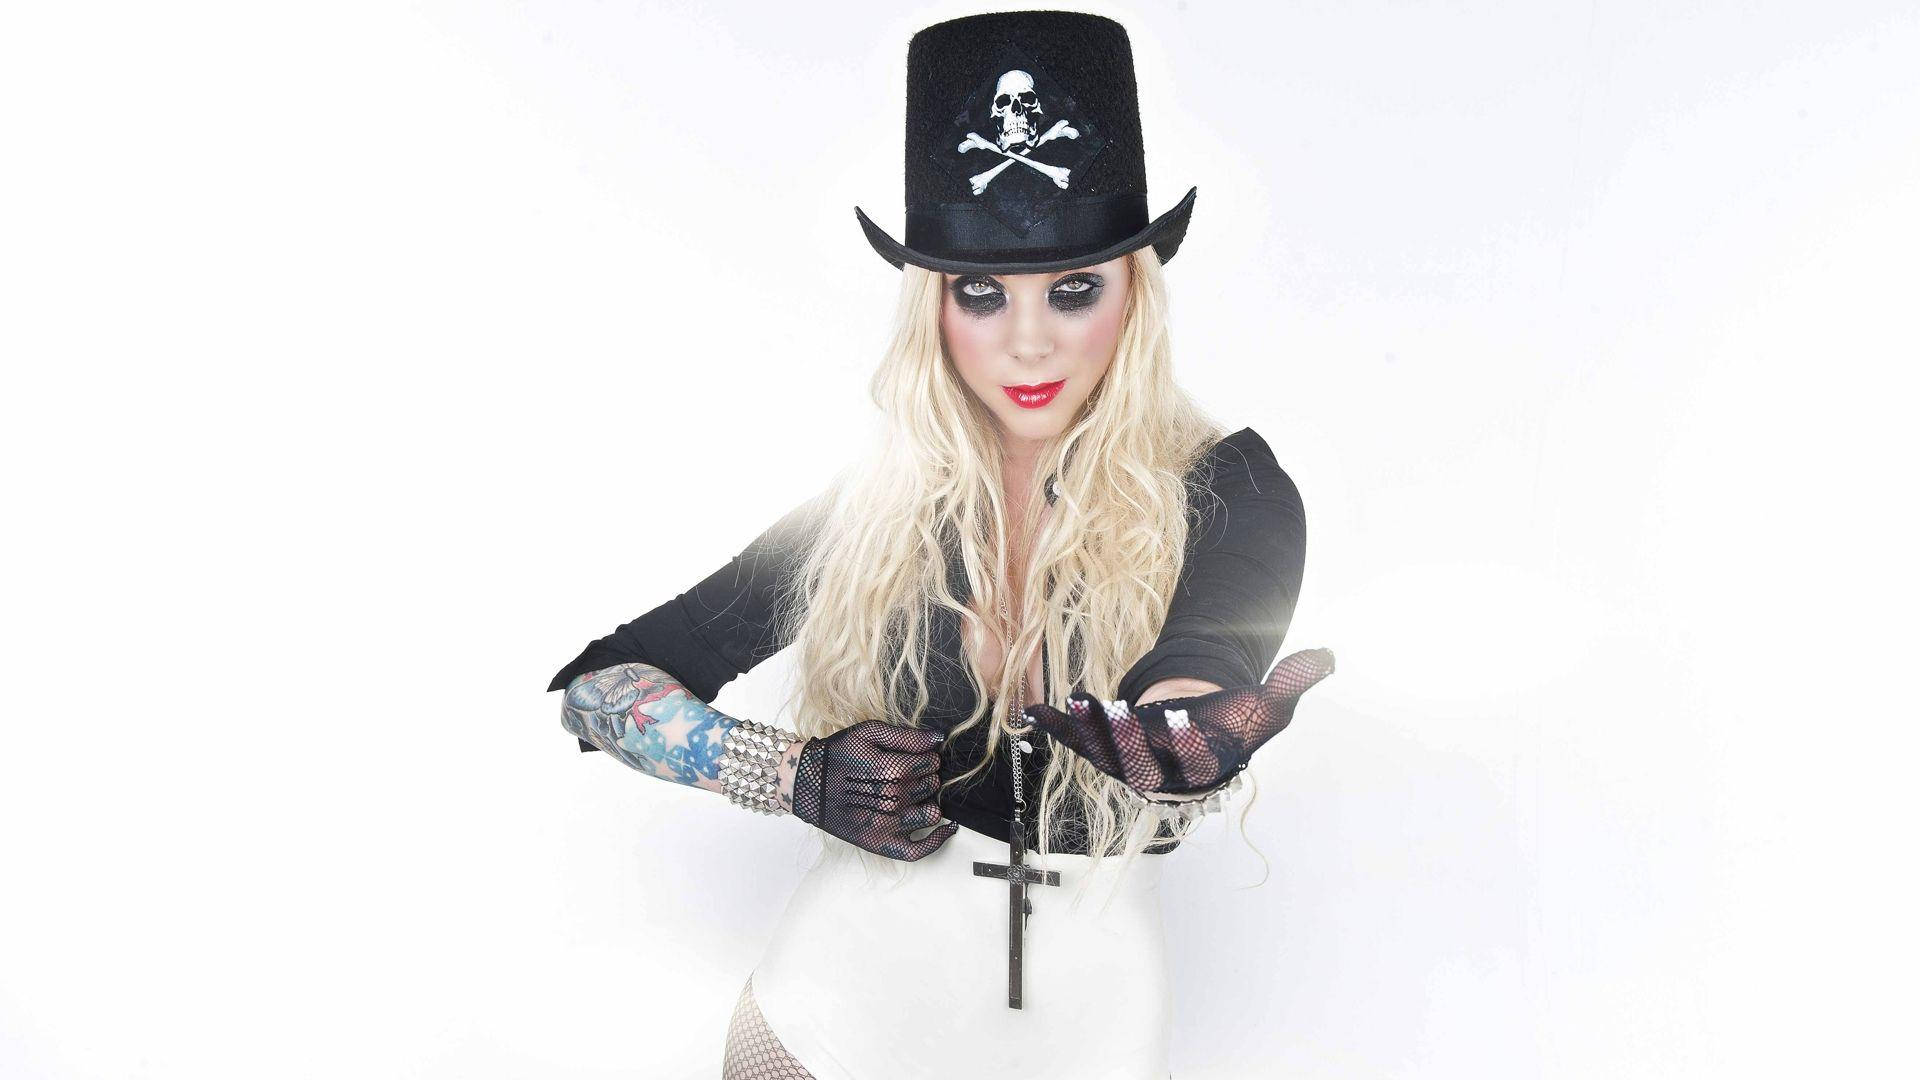 Maria Brink, The Dynamic Singer Of In This Moment In Action Background